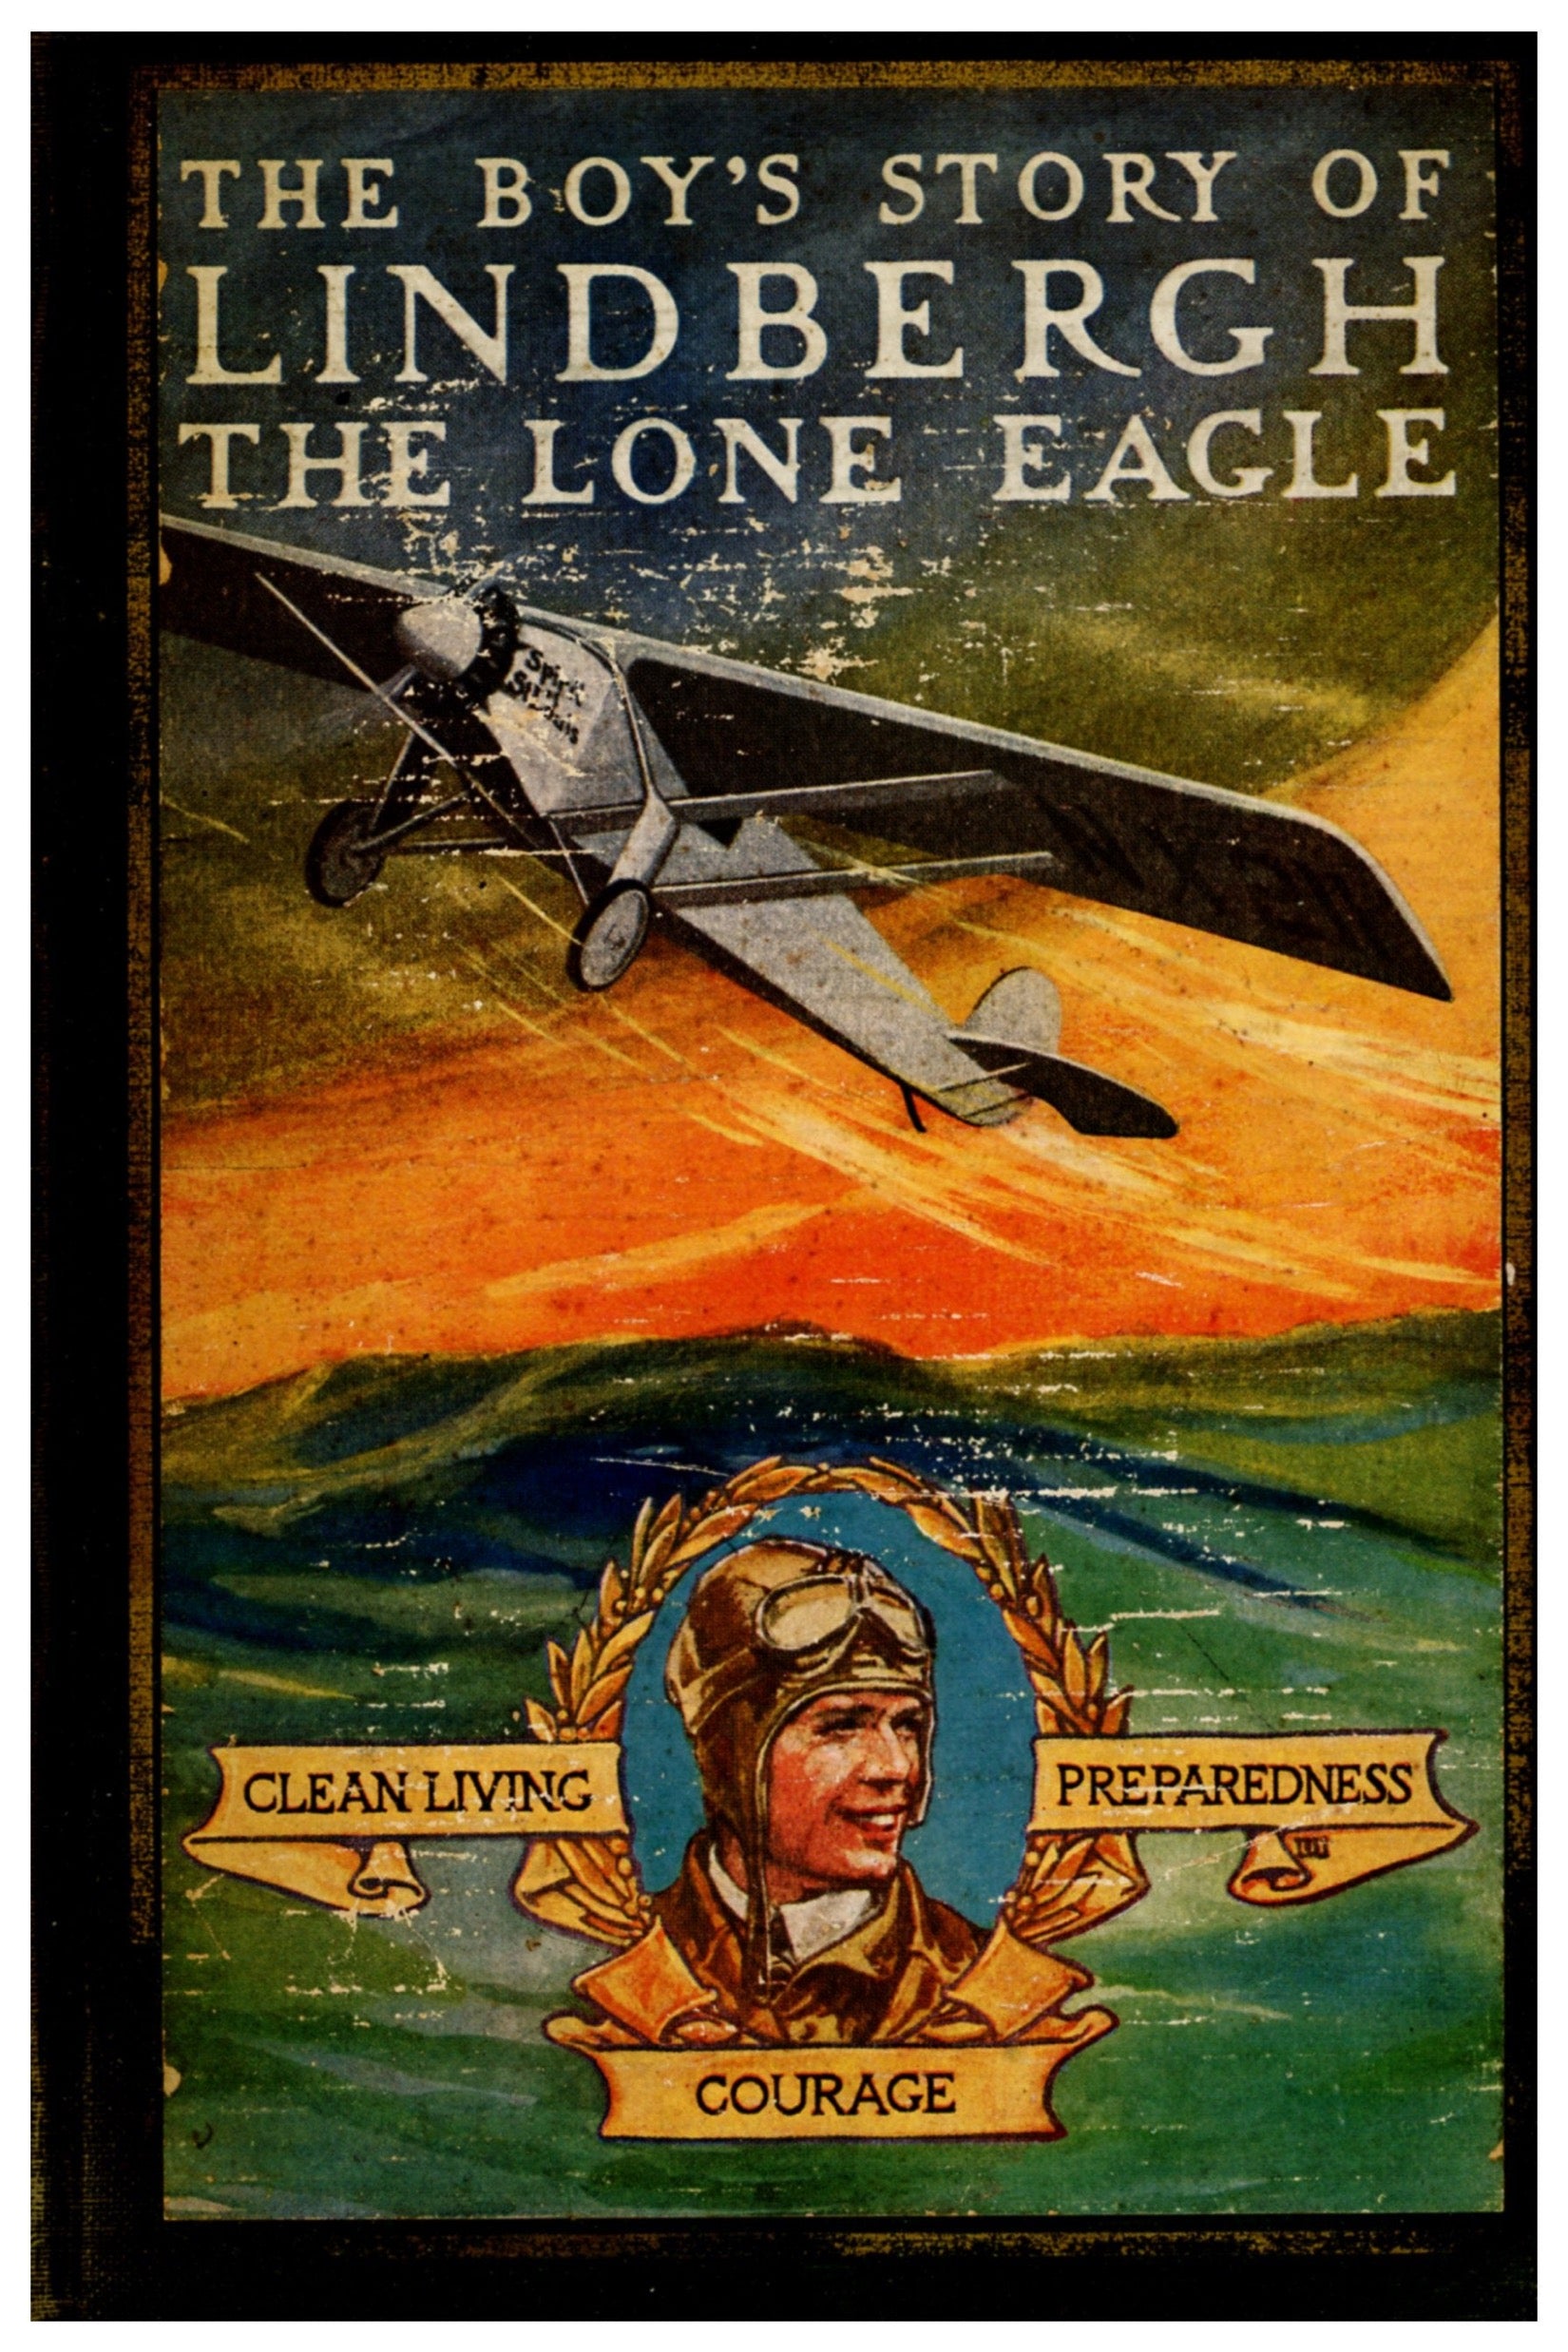 The Boy's Story of LINDBERGH THE LONE EAGLE by Richard J. Beamish ©1928